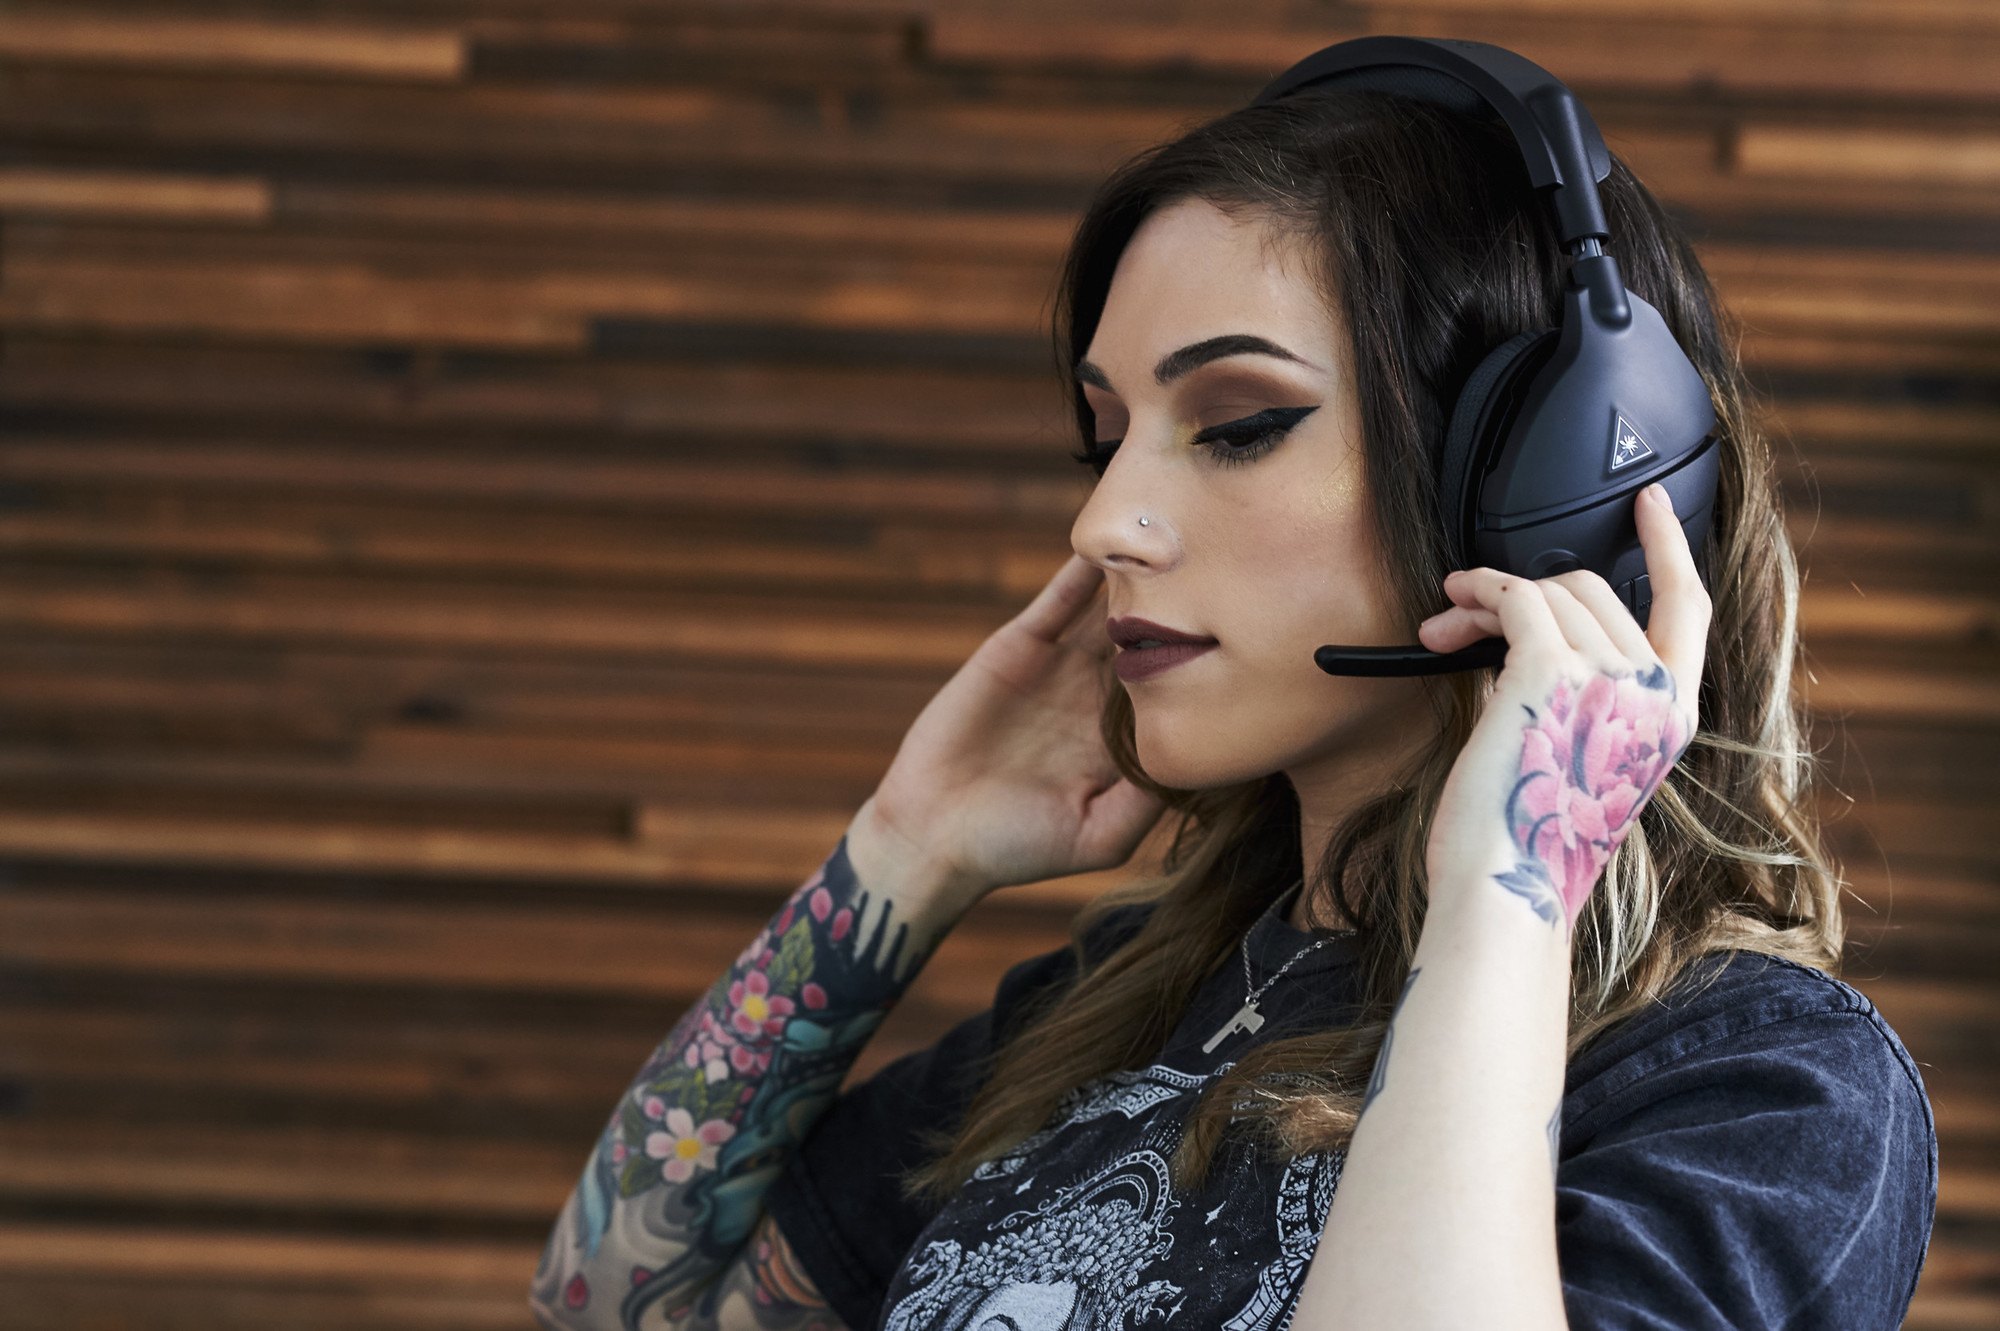 uly 25, 2018 - Turtle Beach gaming shoot with Kovel Fuller in Dallas, Texas